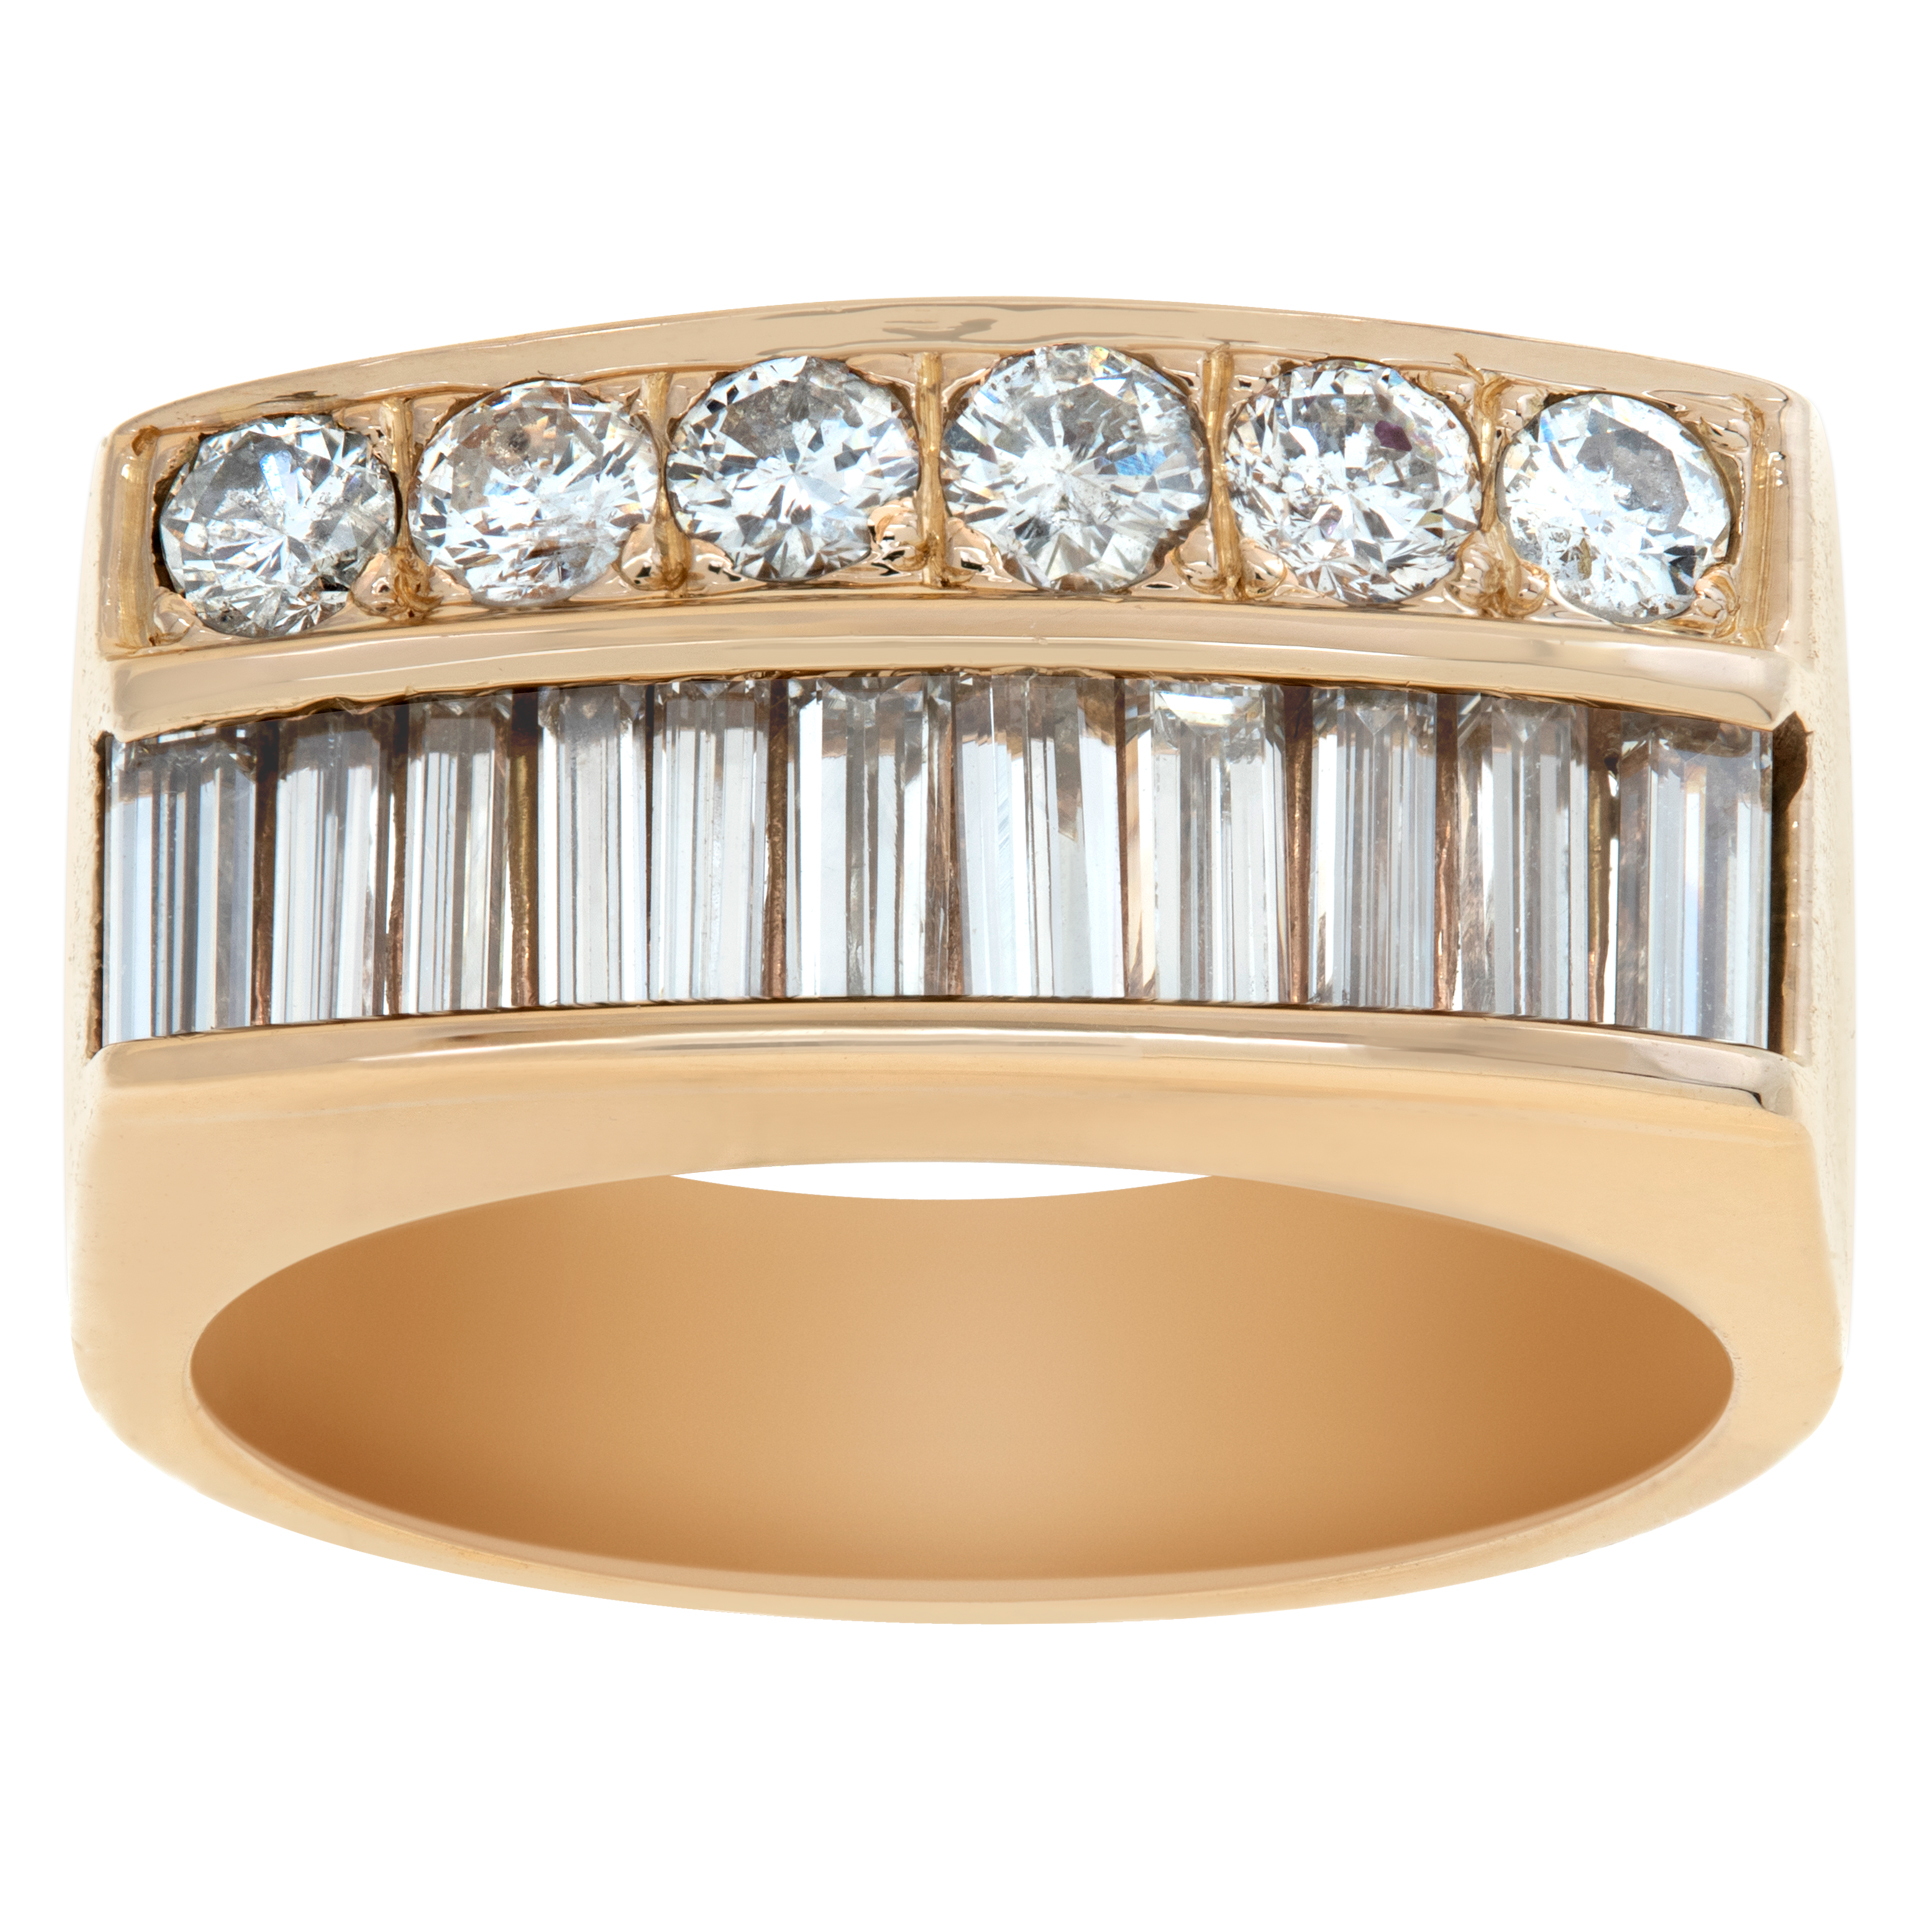 Double Row diamond ring in 18k yellow gold with 1.7 carats in baguettes and round diamonds